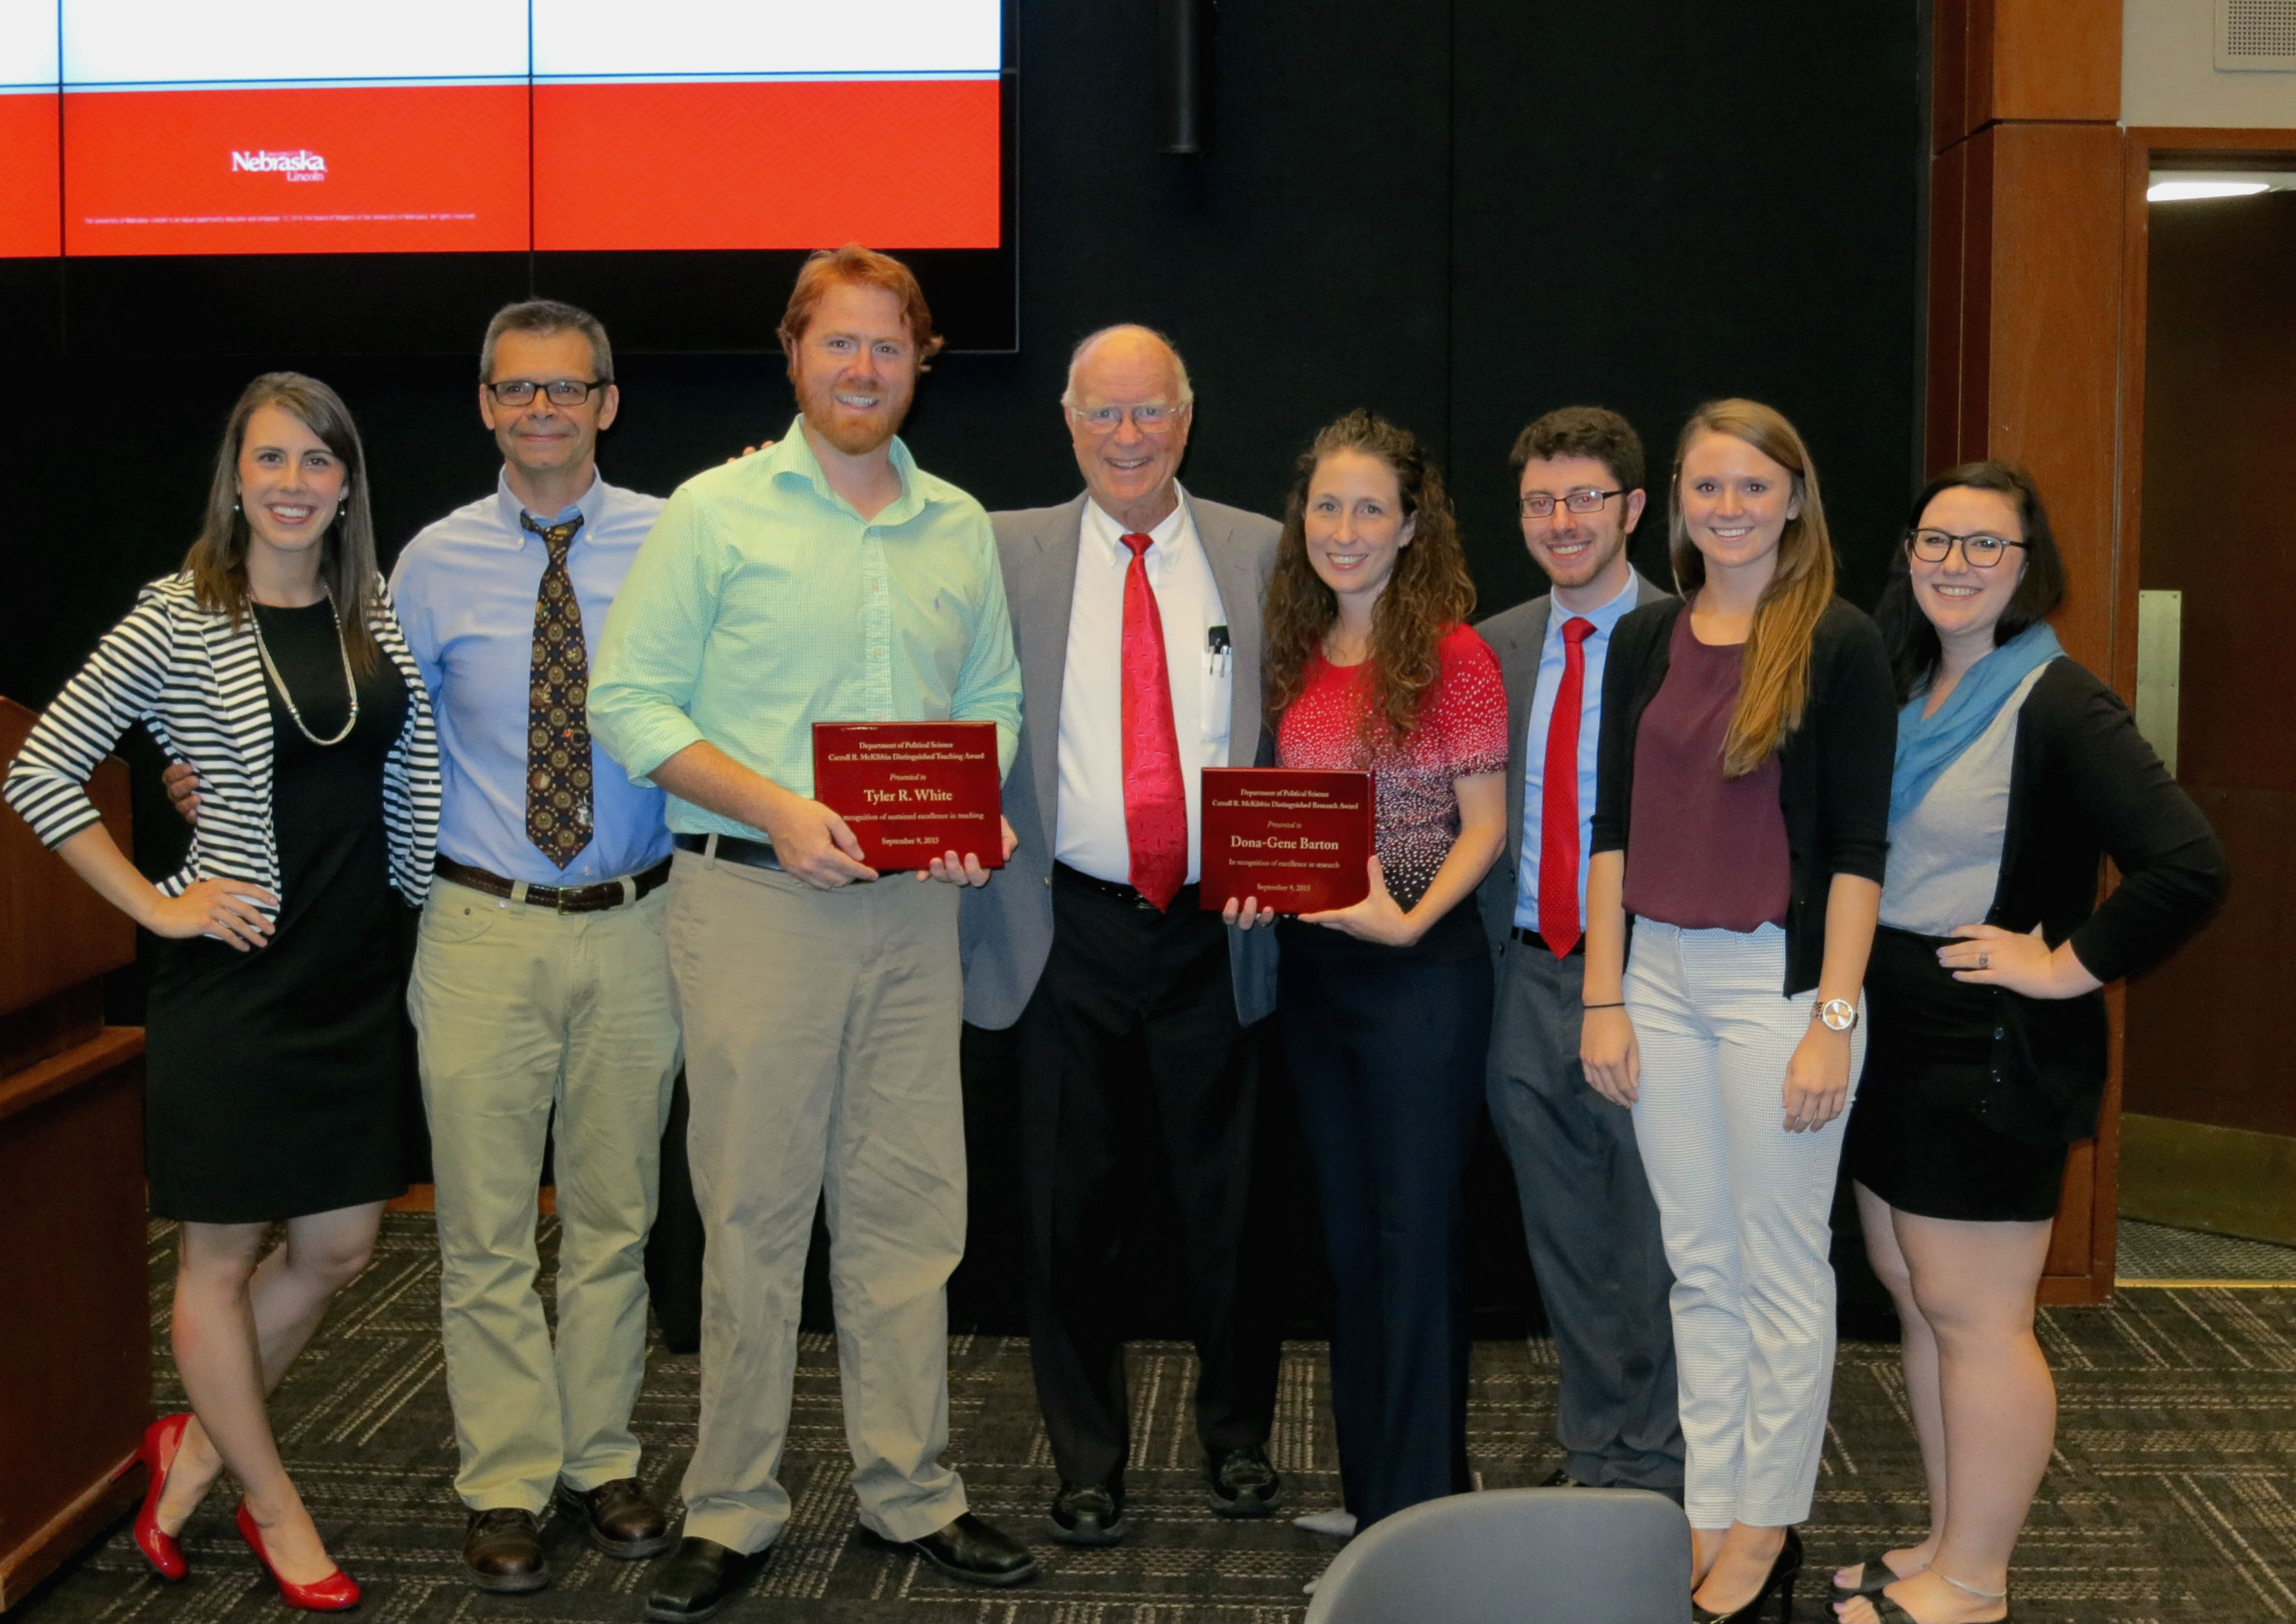 Photo Credit: Political science students and faculty standing around award recipients